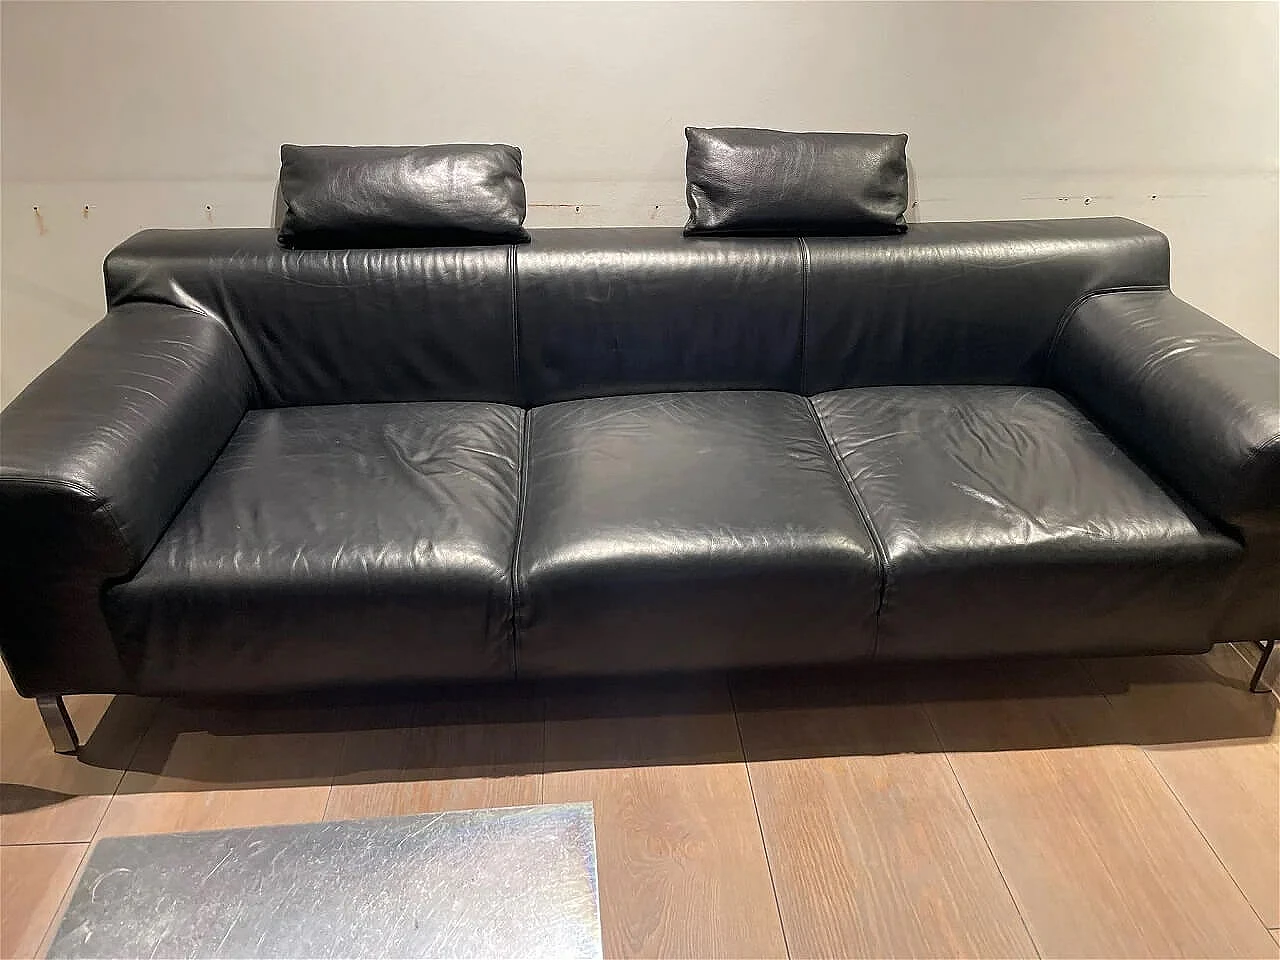 Pair of Greg sofas and bench in black leather by Emaf Progetti for Zanotta 2